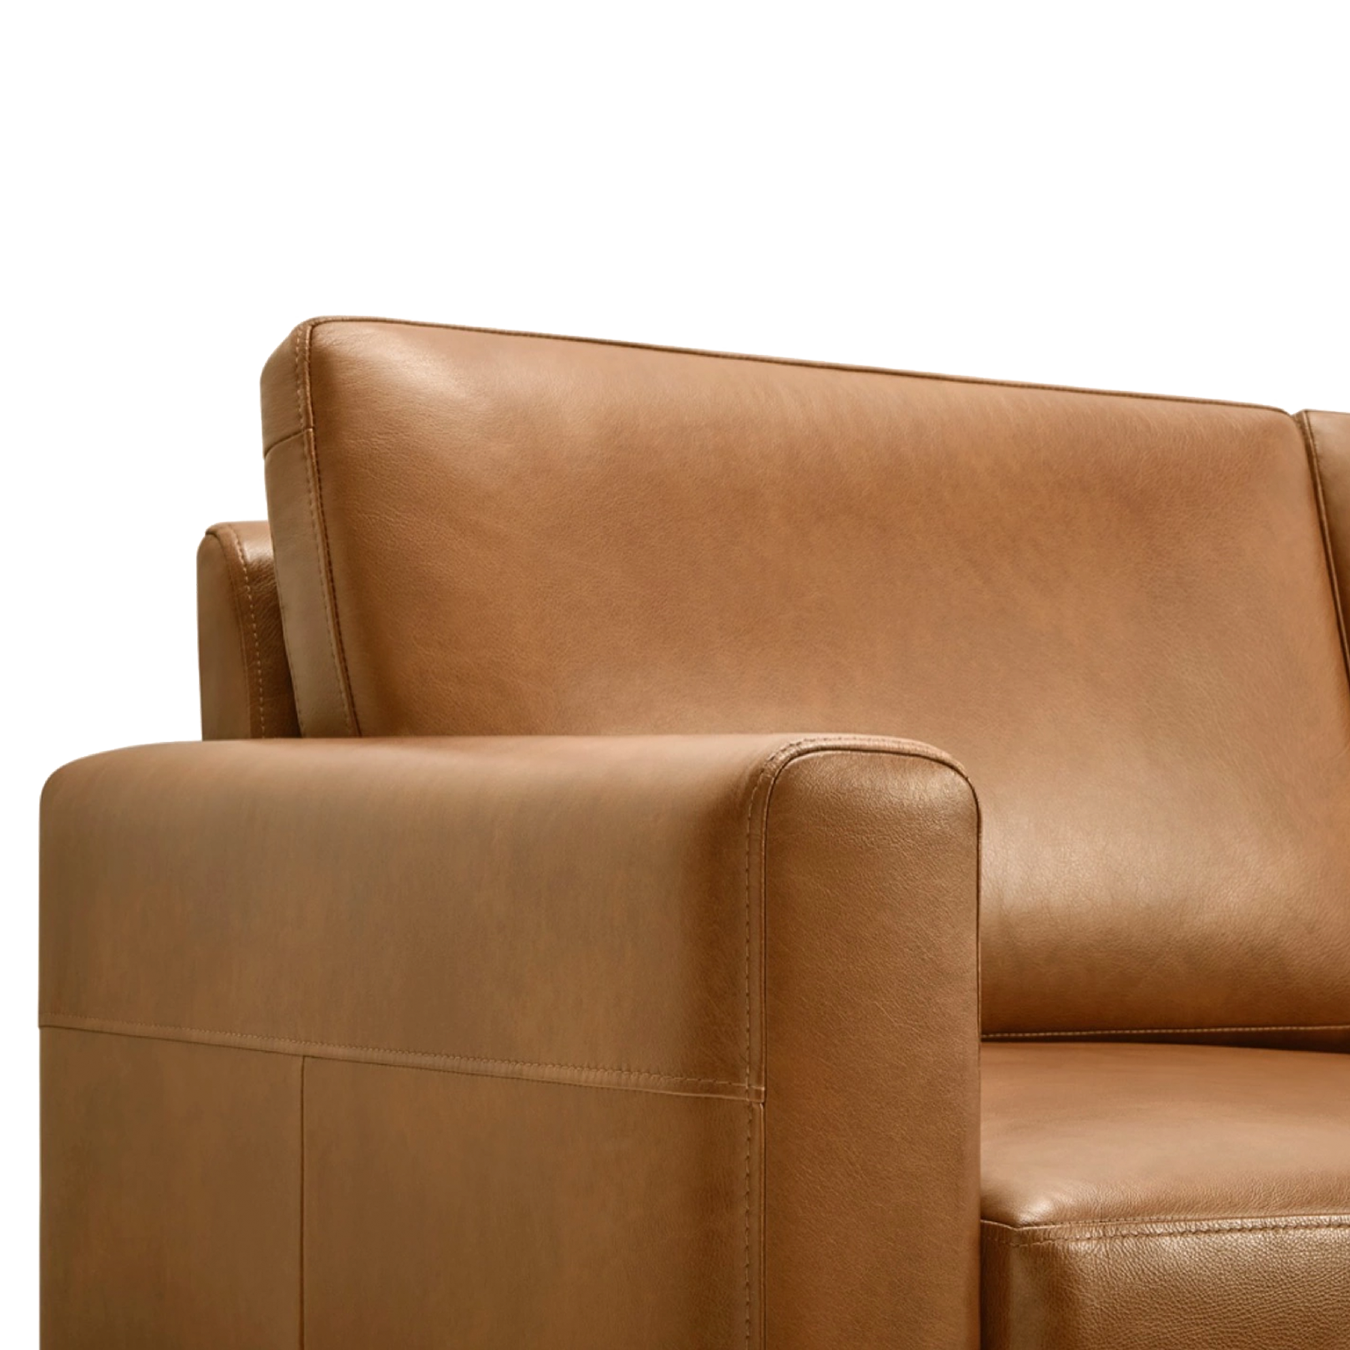 Nomad leather sofa in Camel